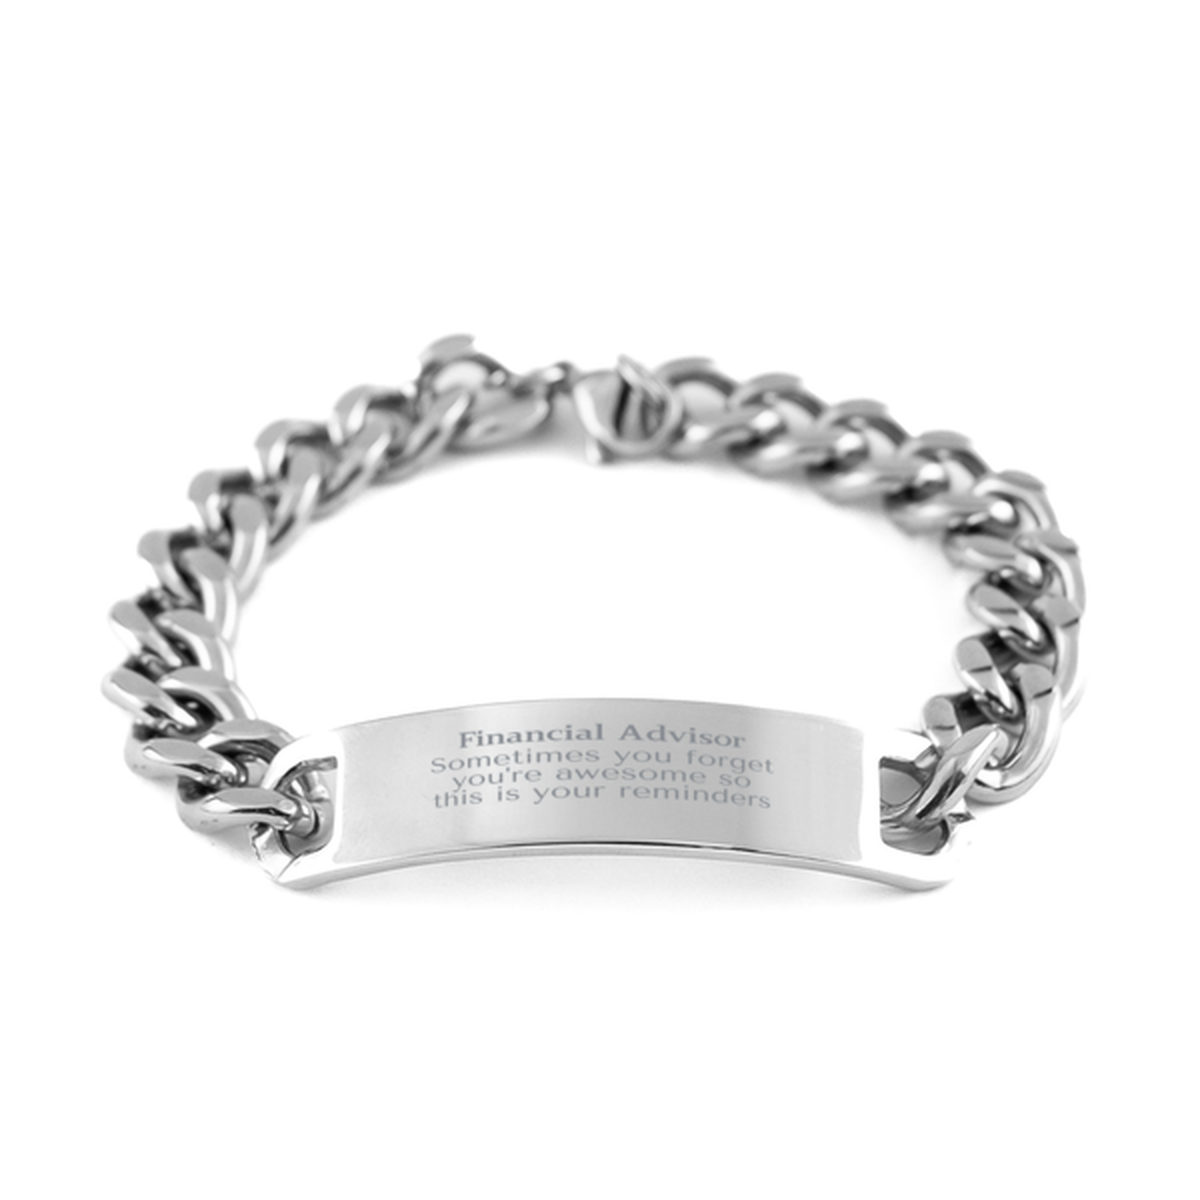 Sentimental Financial Advisor Cuban Chain Stainless Steel Bracelet, Financial Advisor Sometimes you forget you're awesome so this is your reminders, Graduation Christmas Birthday Gifts for Financial Advisor, Men, Women, Coworkers